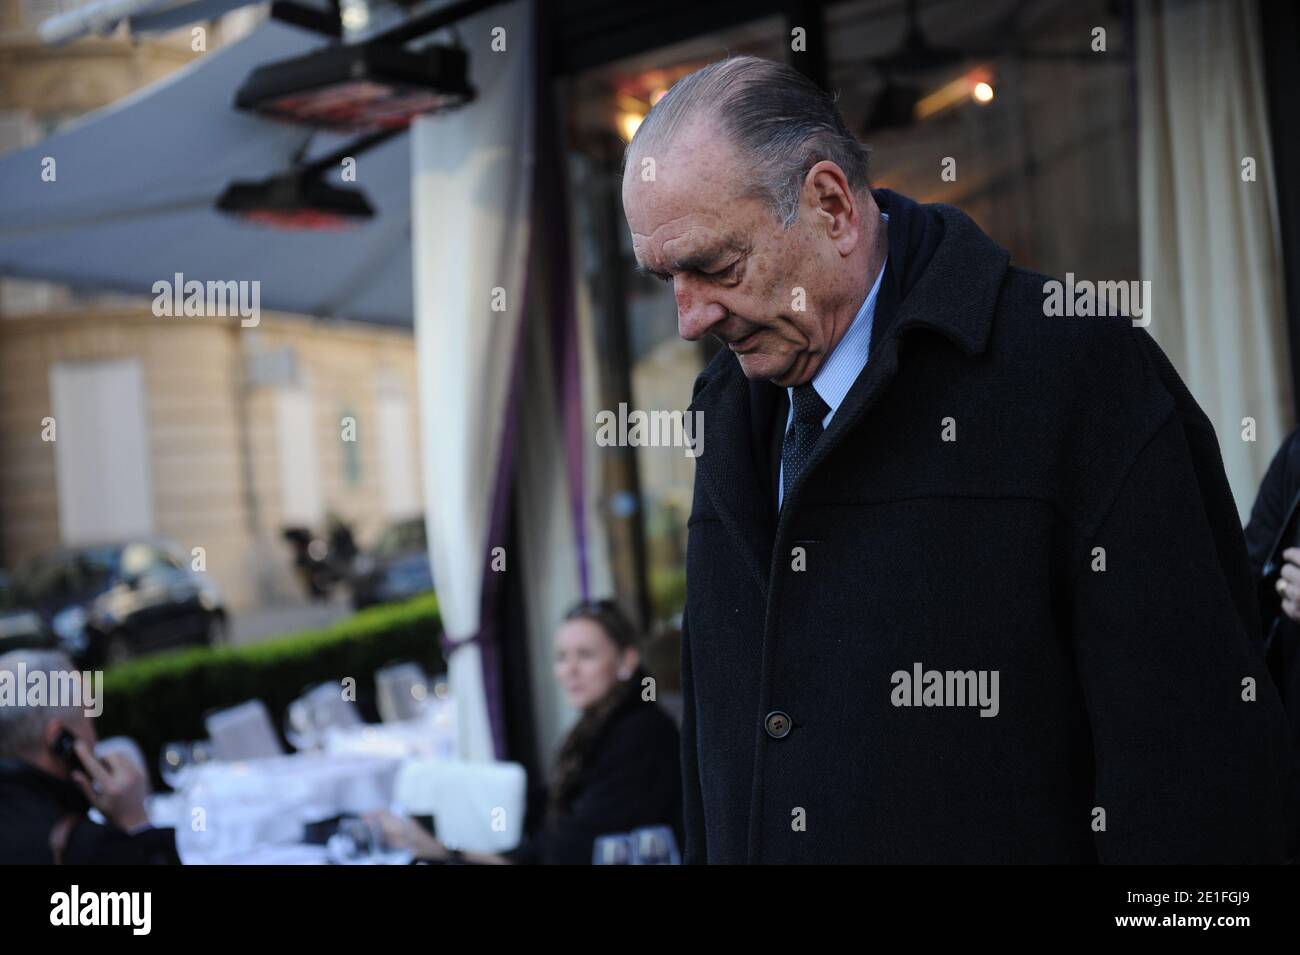 Former French President Jacques Chirac is pictured as he is leaving the L’Avenue restaurant in Paris, France on March 21, 2011. Photo by Mousse/ABACAPRESS.COM Stock Photo